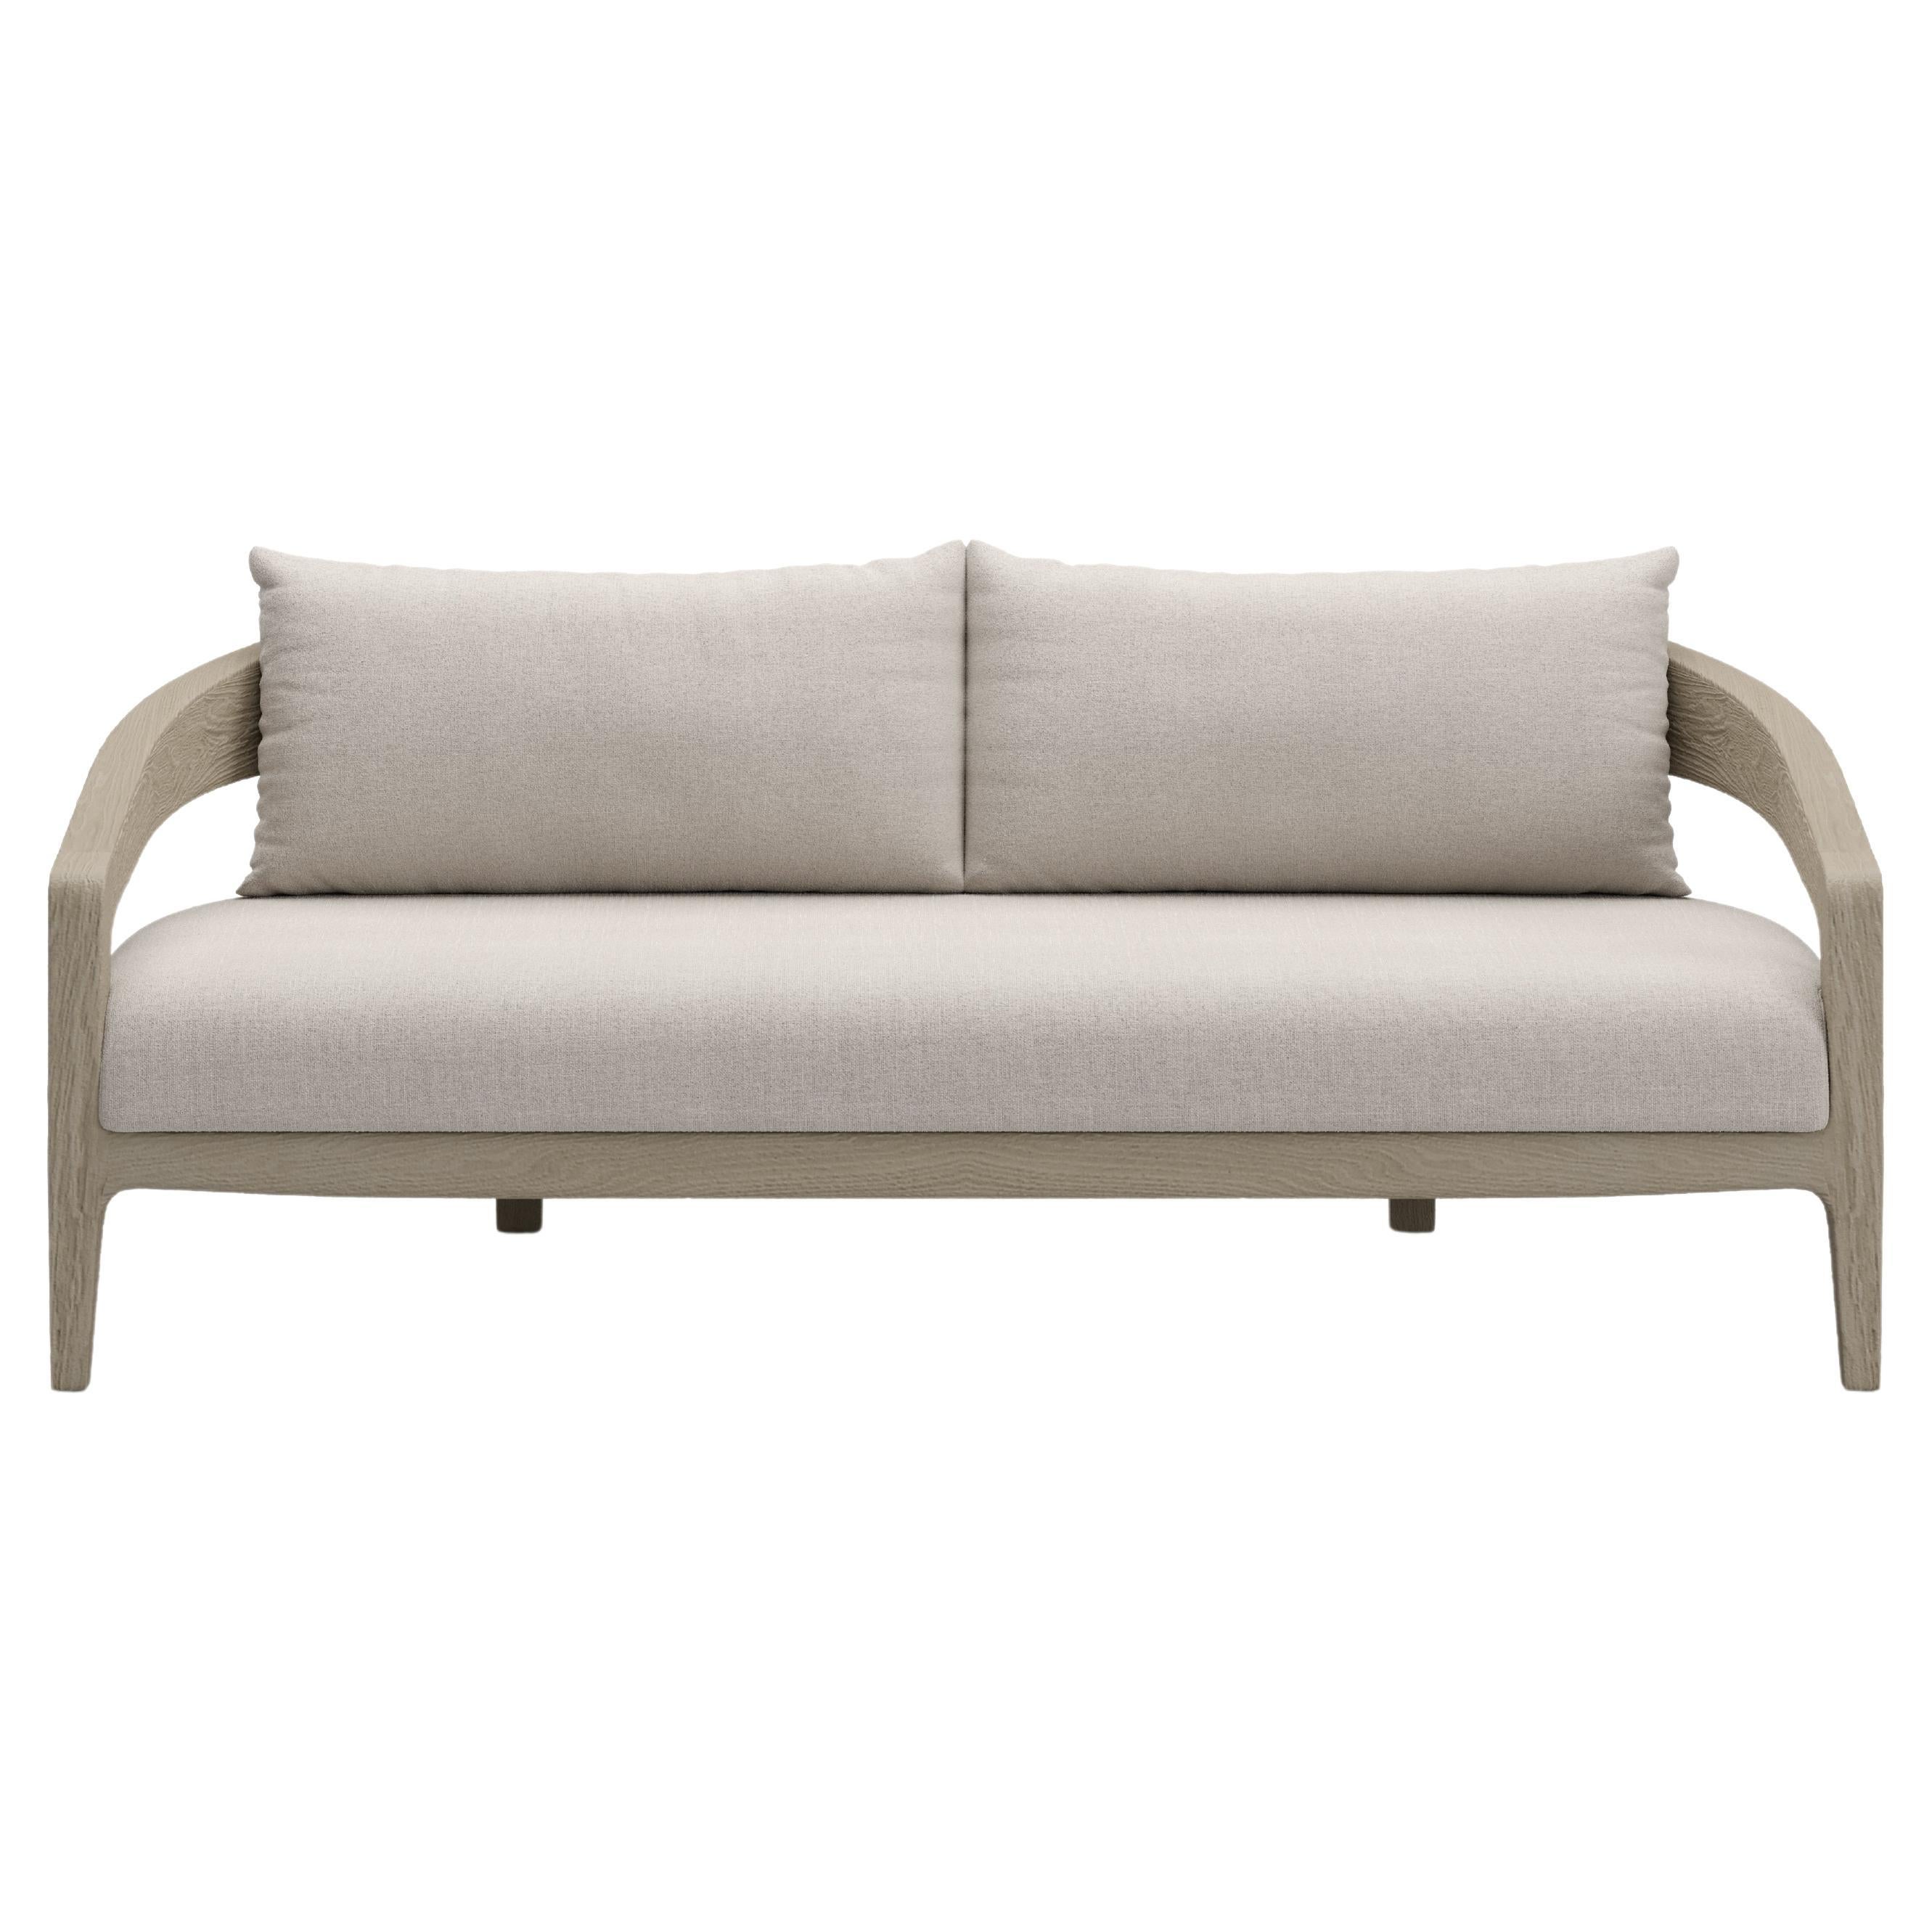 Whale-ash Outdoor 2 Seater Sofa by Snoc For Sale